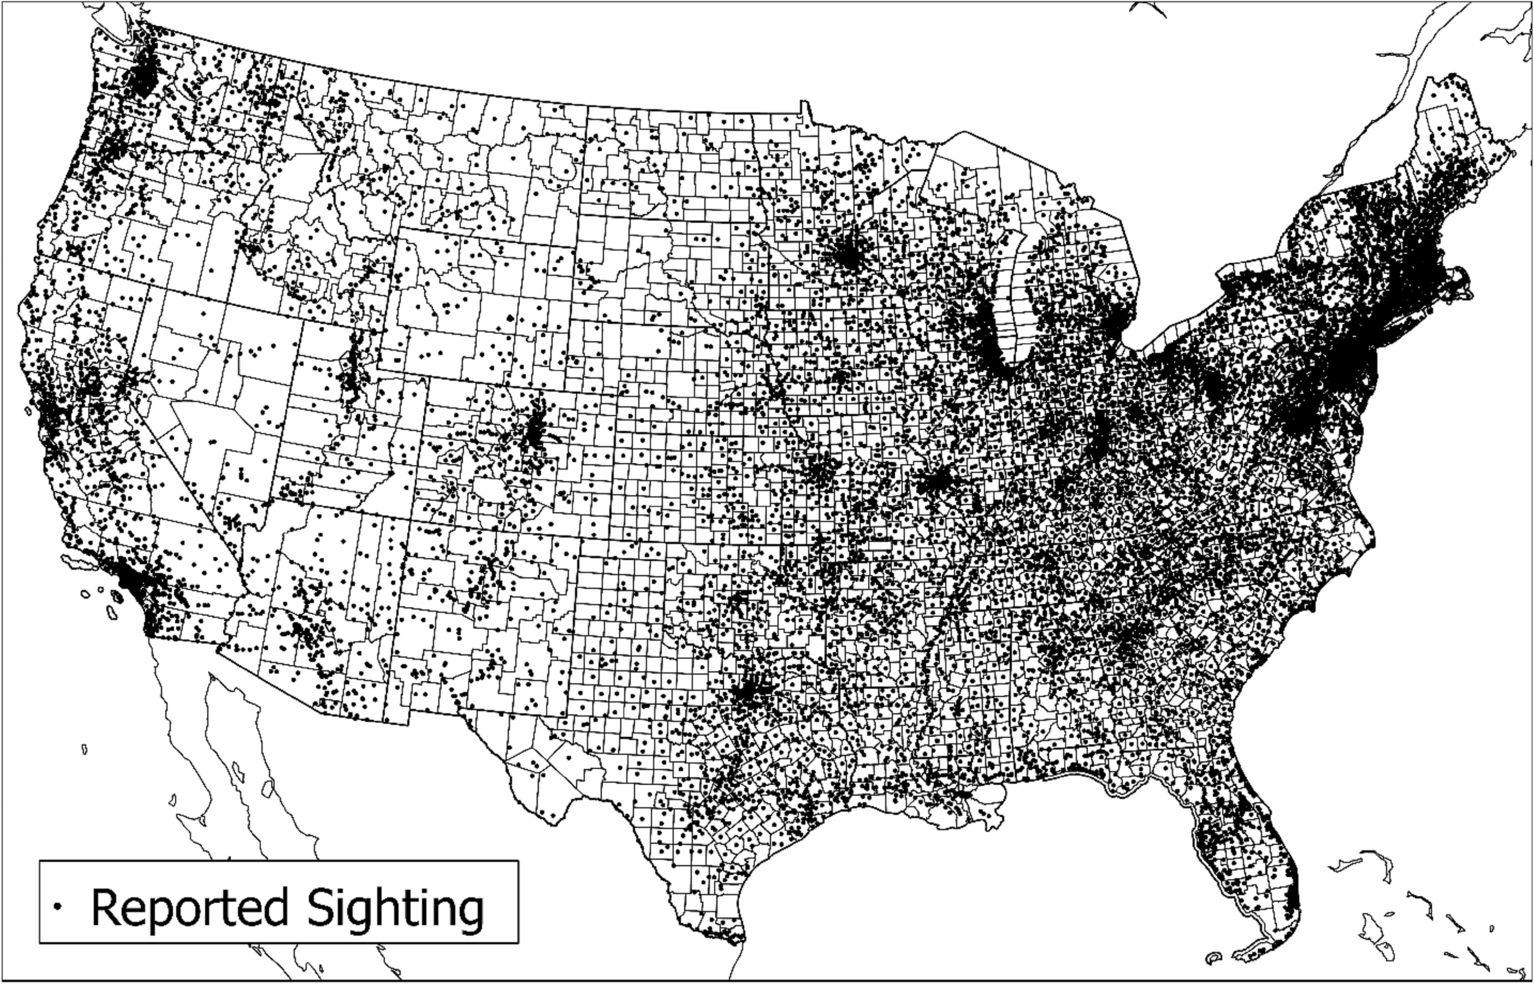 Figure 1 - NUFORC Reported Sighting Spatial Distribution for the Conterminous U.S. from 2001 to 2020 .